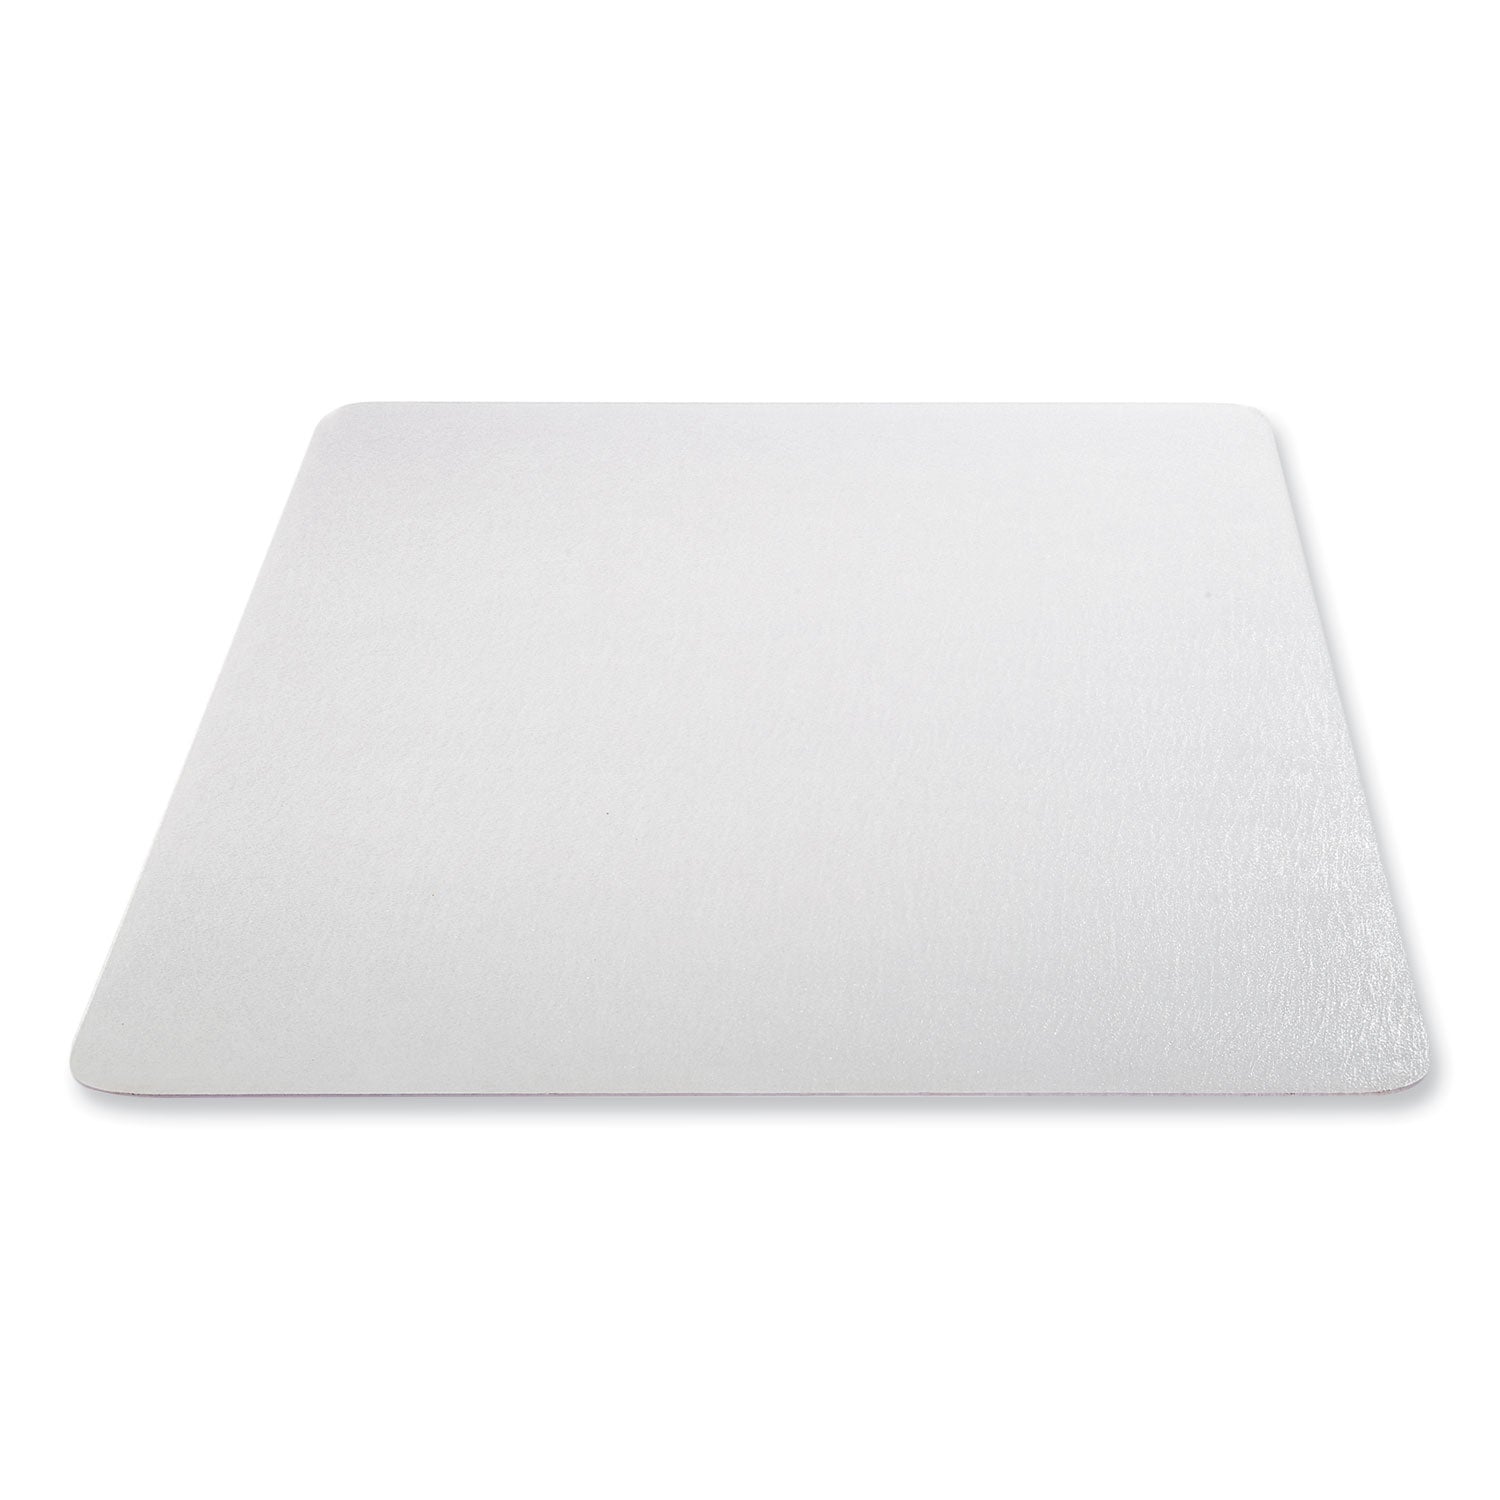 economat-all-day-use-chair-mat-for-hard-floors-flat-packed-36-x-48-clear_defcm2e142 - 7